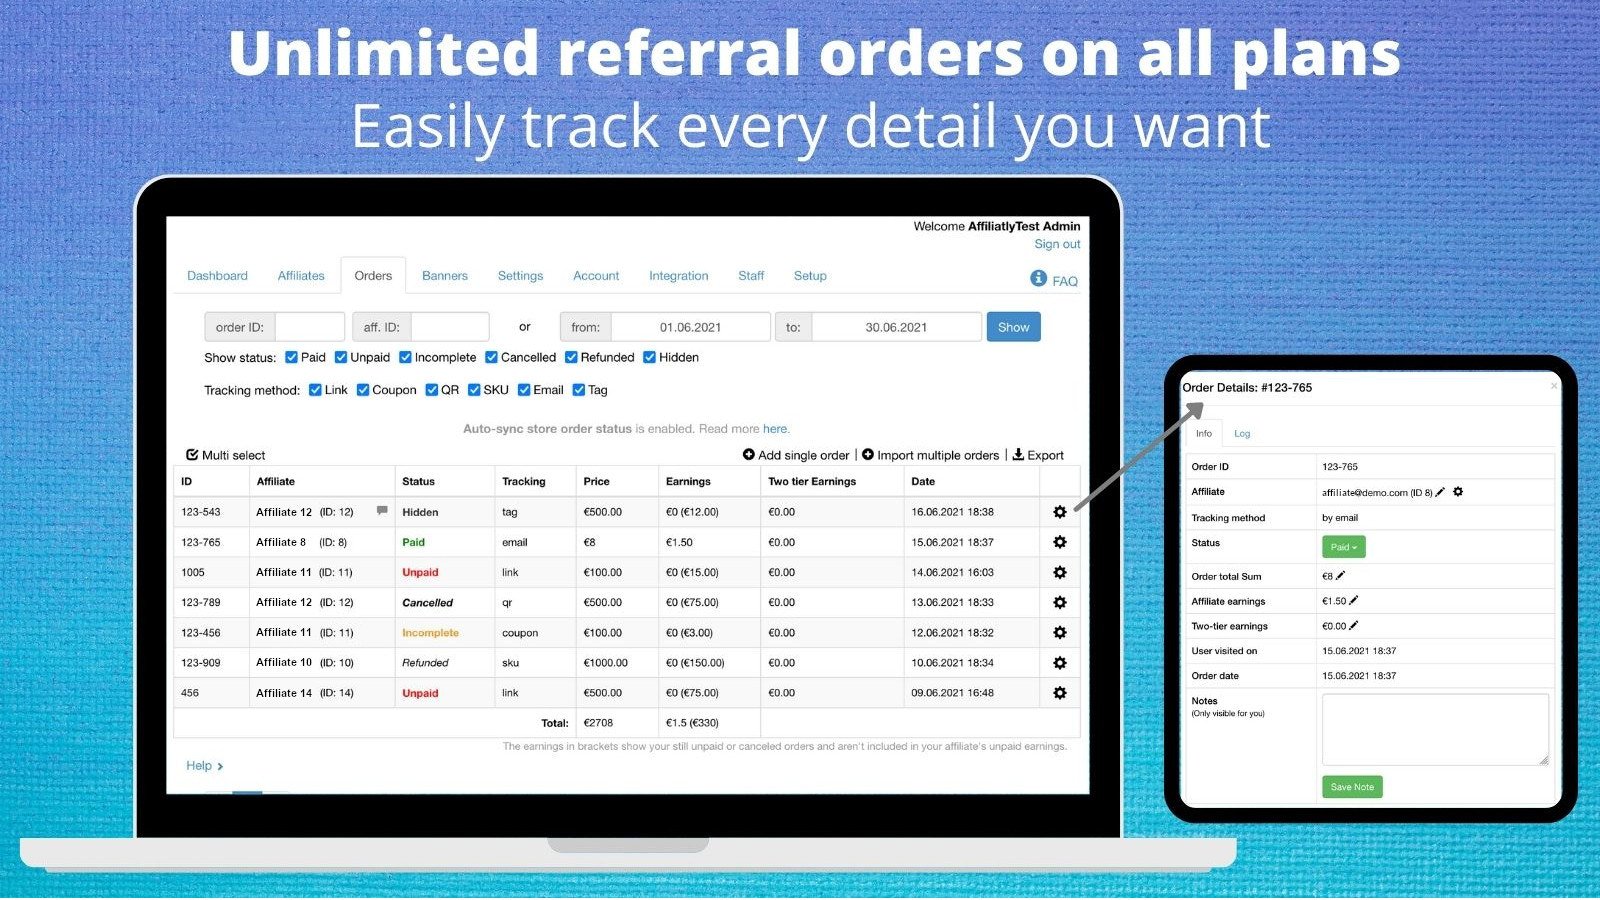 Unlimited referral orders - Track every detail of your referrals